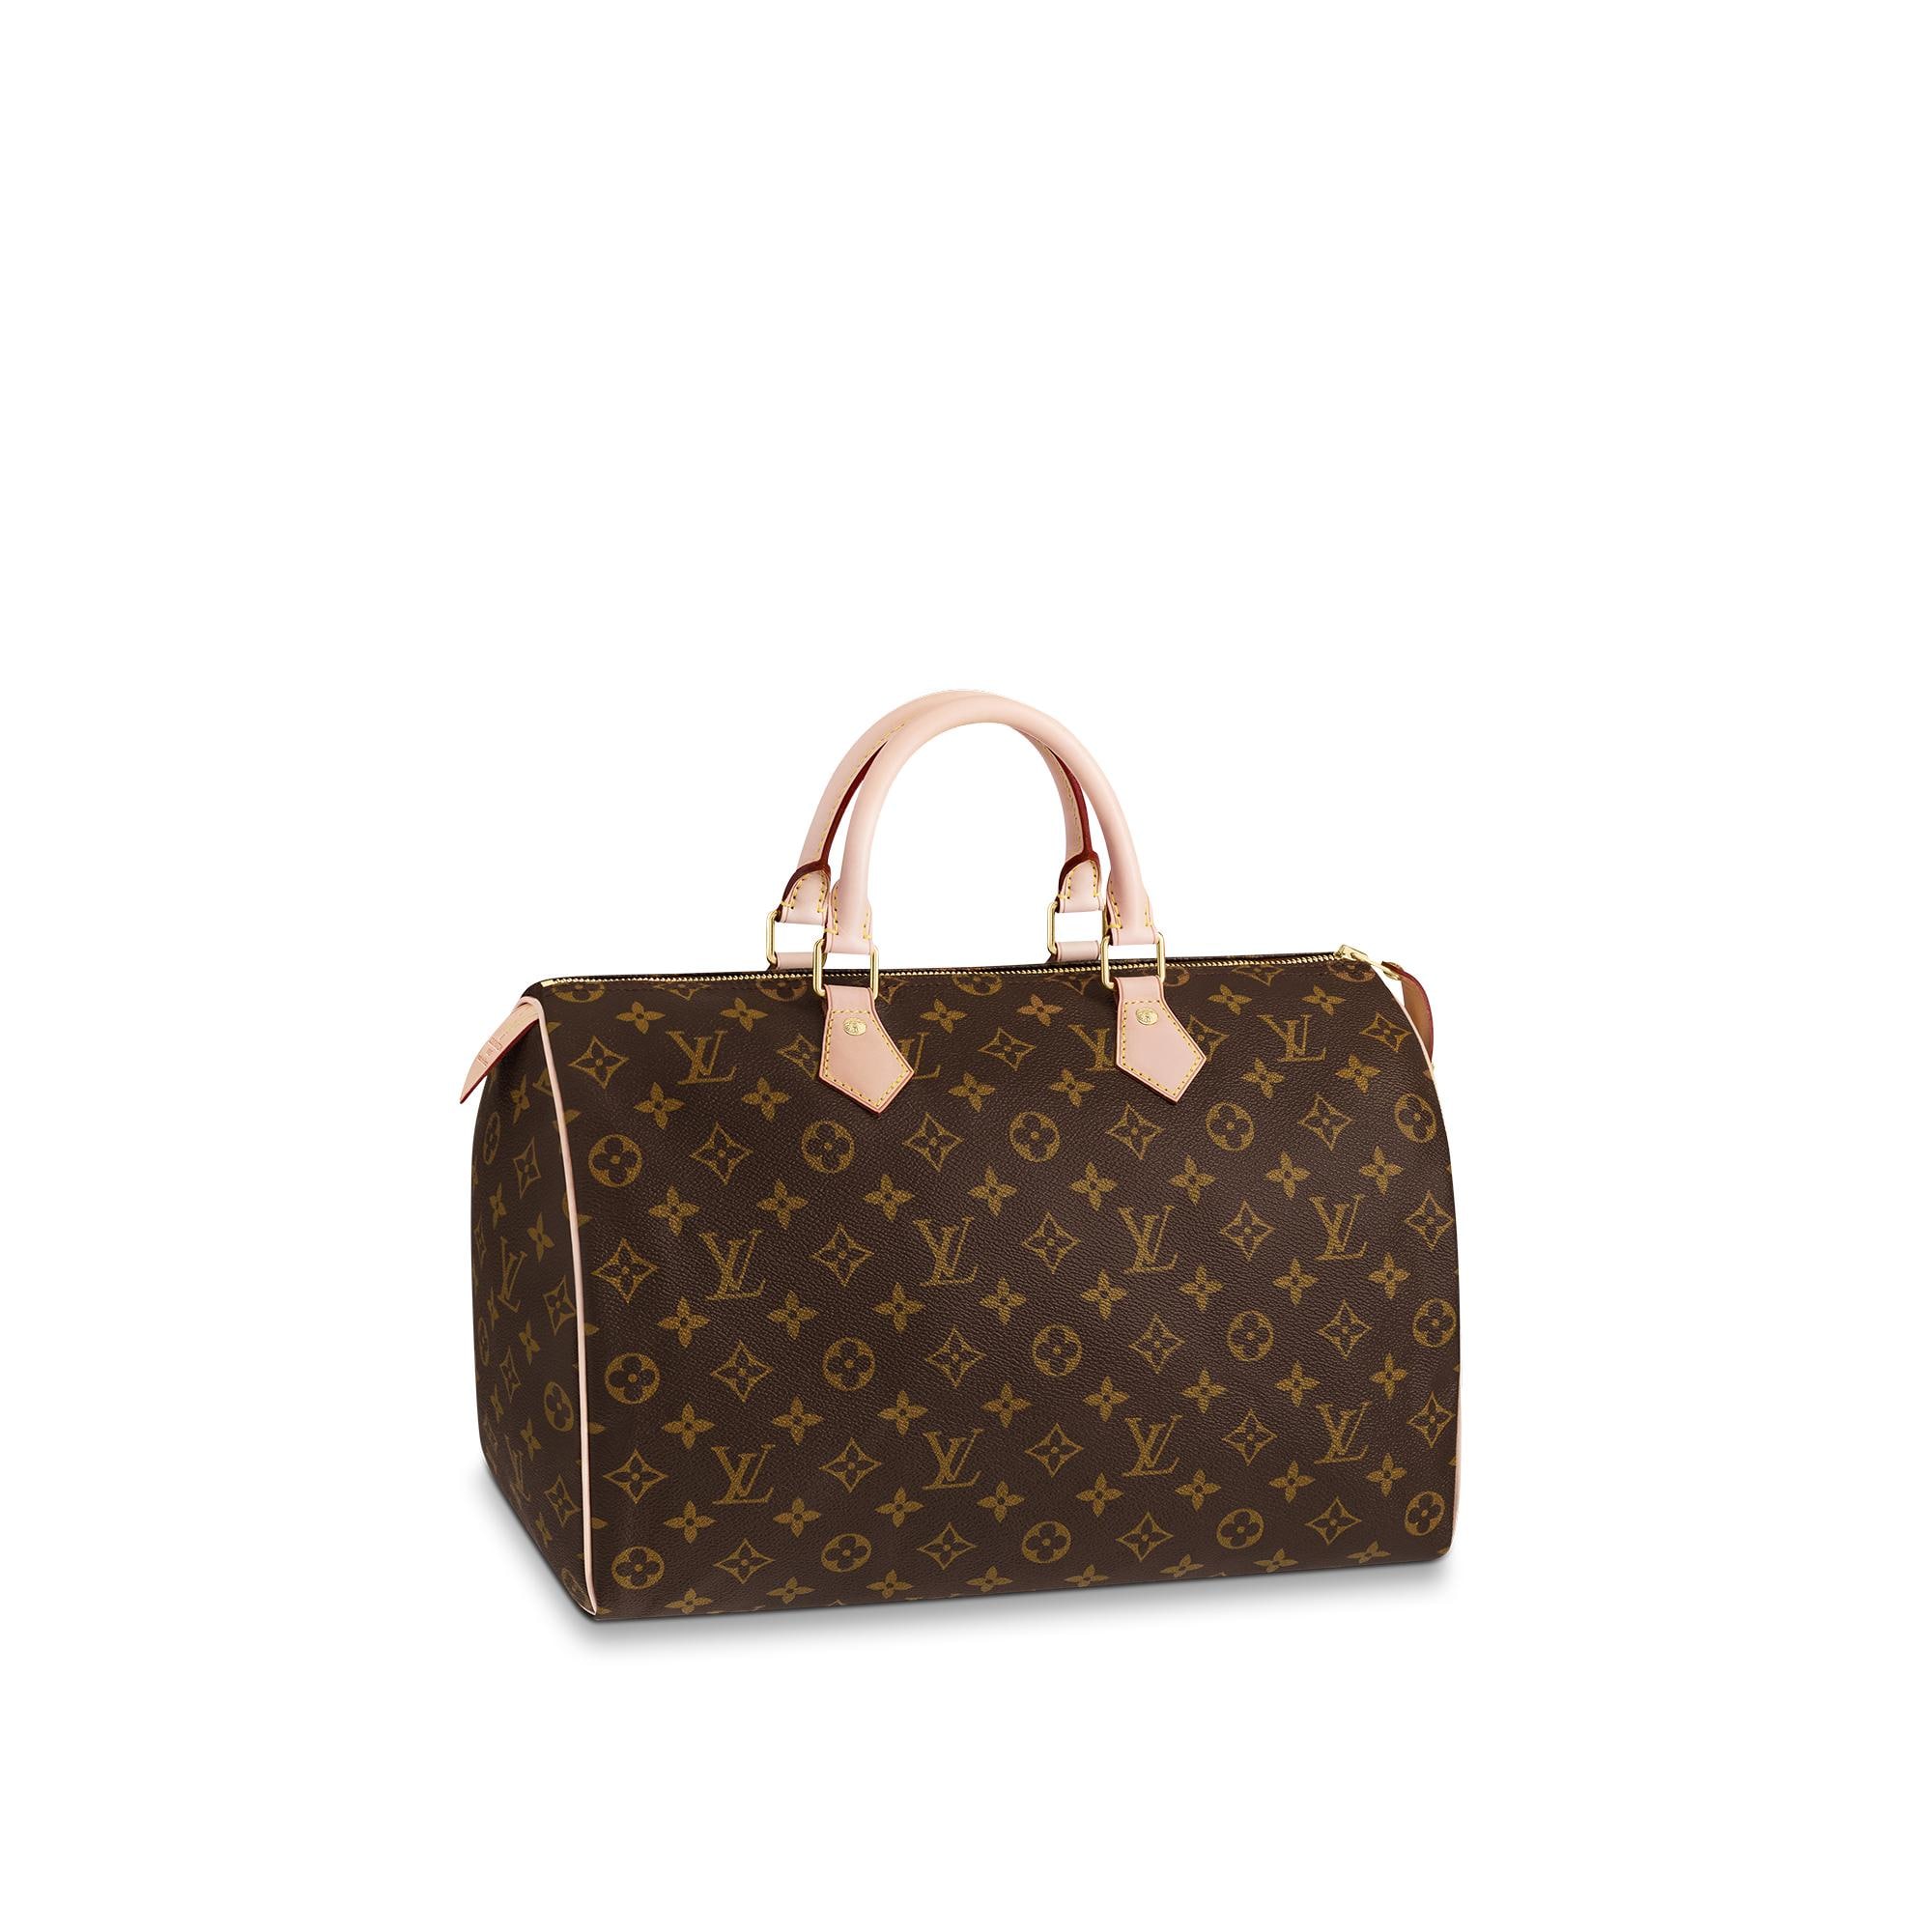 History of a Classic: The Louis Vuitton Speedy - BagAddicts Anonymous